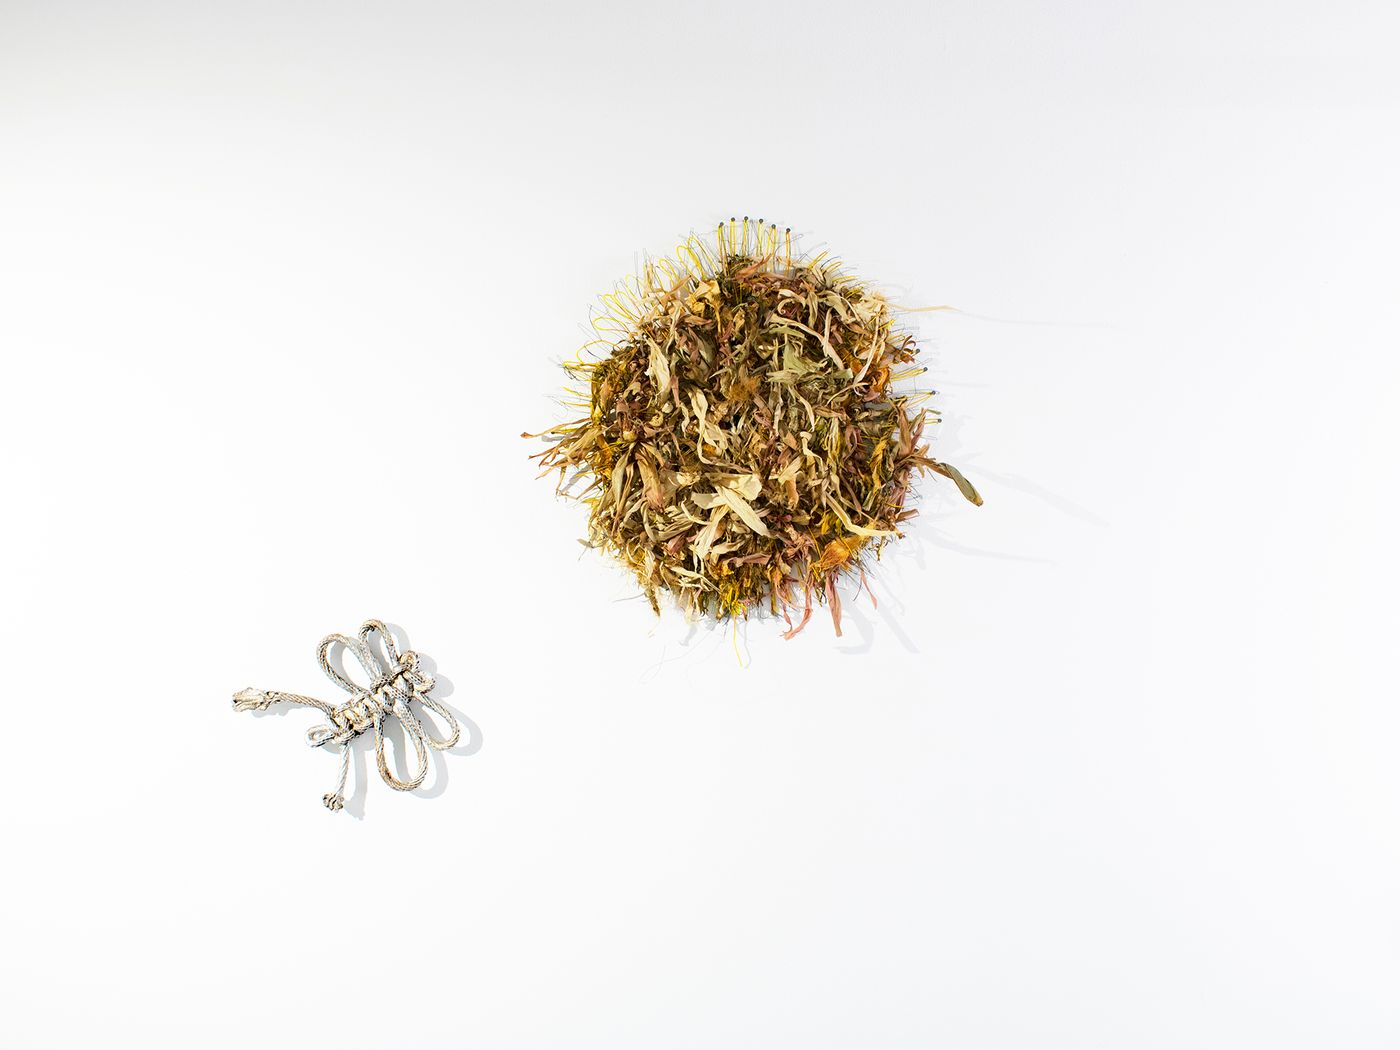 hoi1 faa1/florecer, 2021-22. Nylon string, floral wire, corn husks, corn leaves, night blooming cereus and nails on wall; 44 x 35 x 6 in. Photo: Sebastián Pérez.